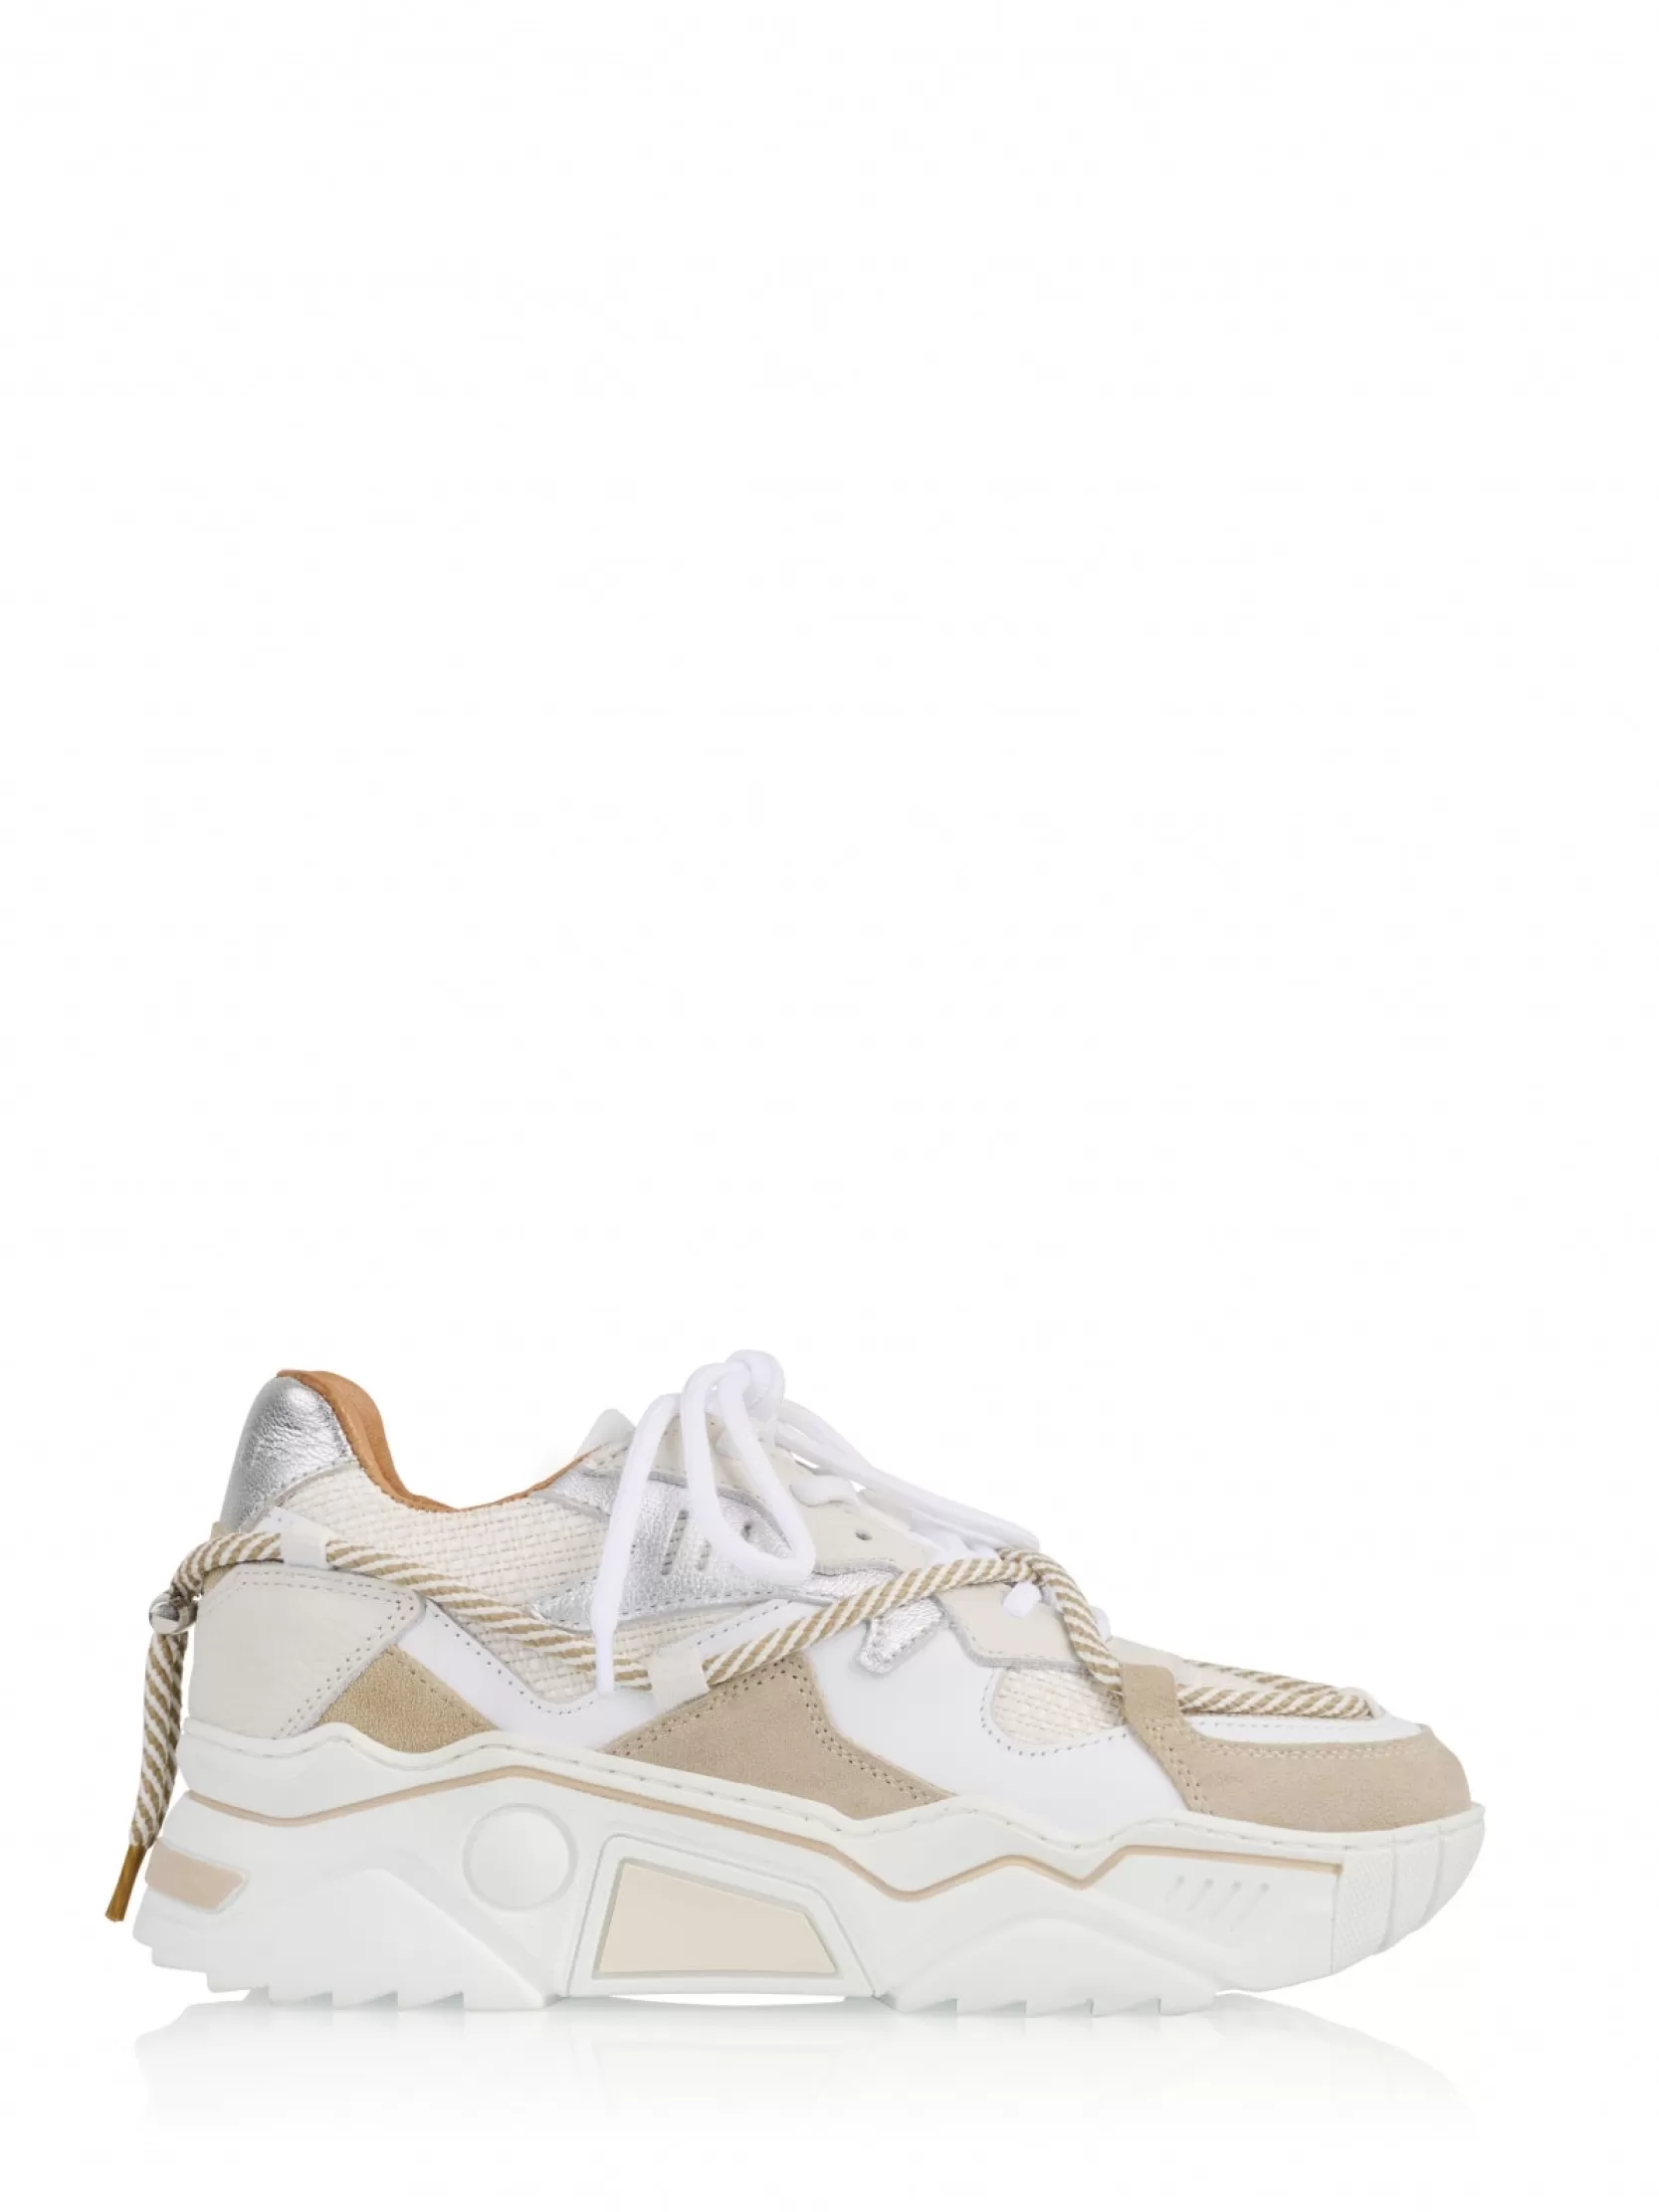 DWRS label SNEAKERS>JUPITER raffia - Sneakers | Off white / Sand